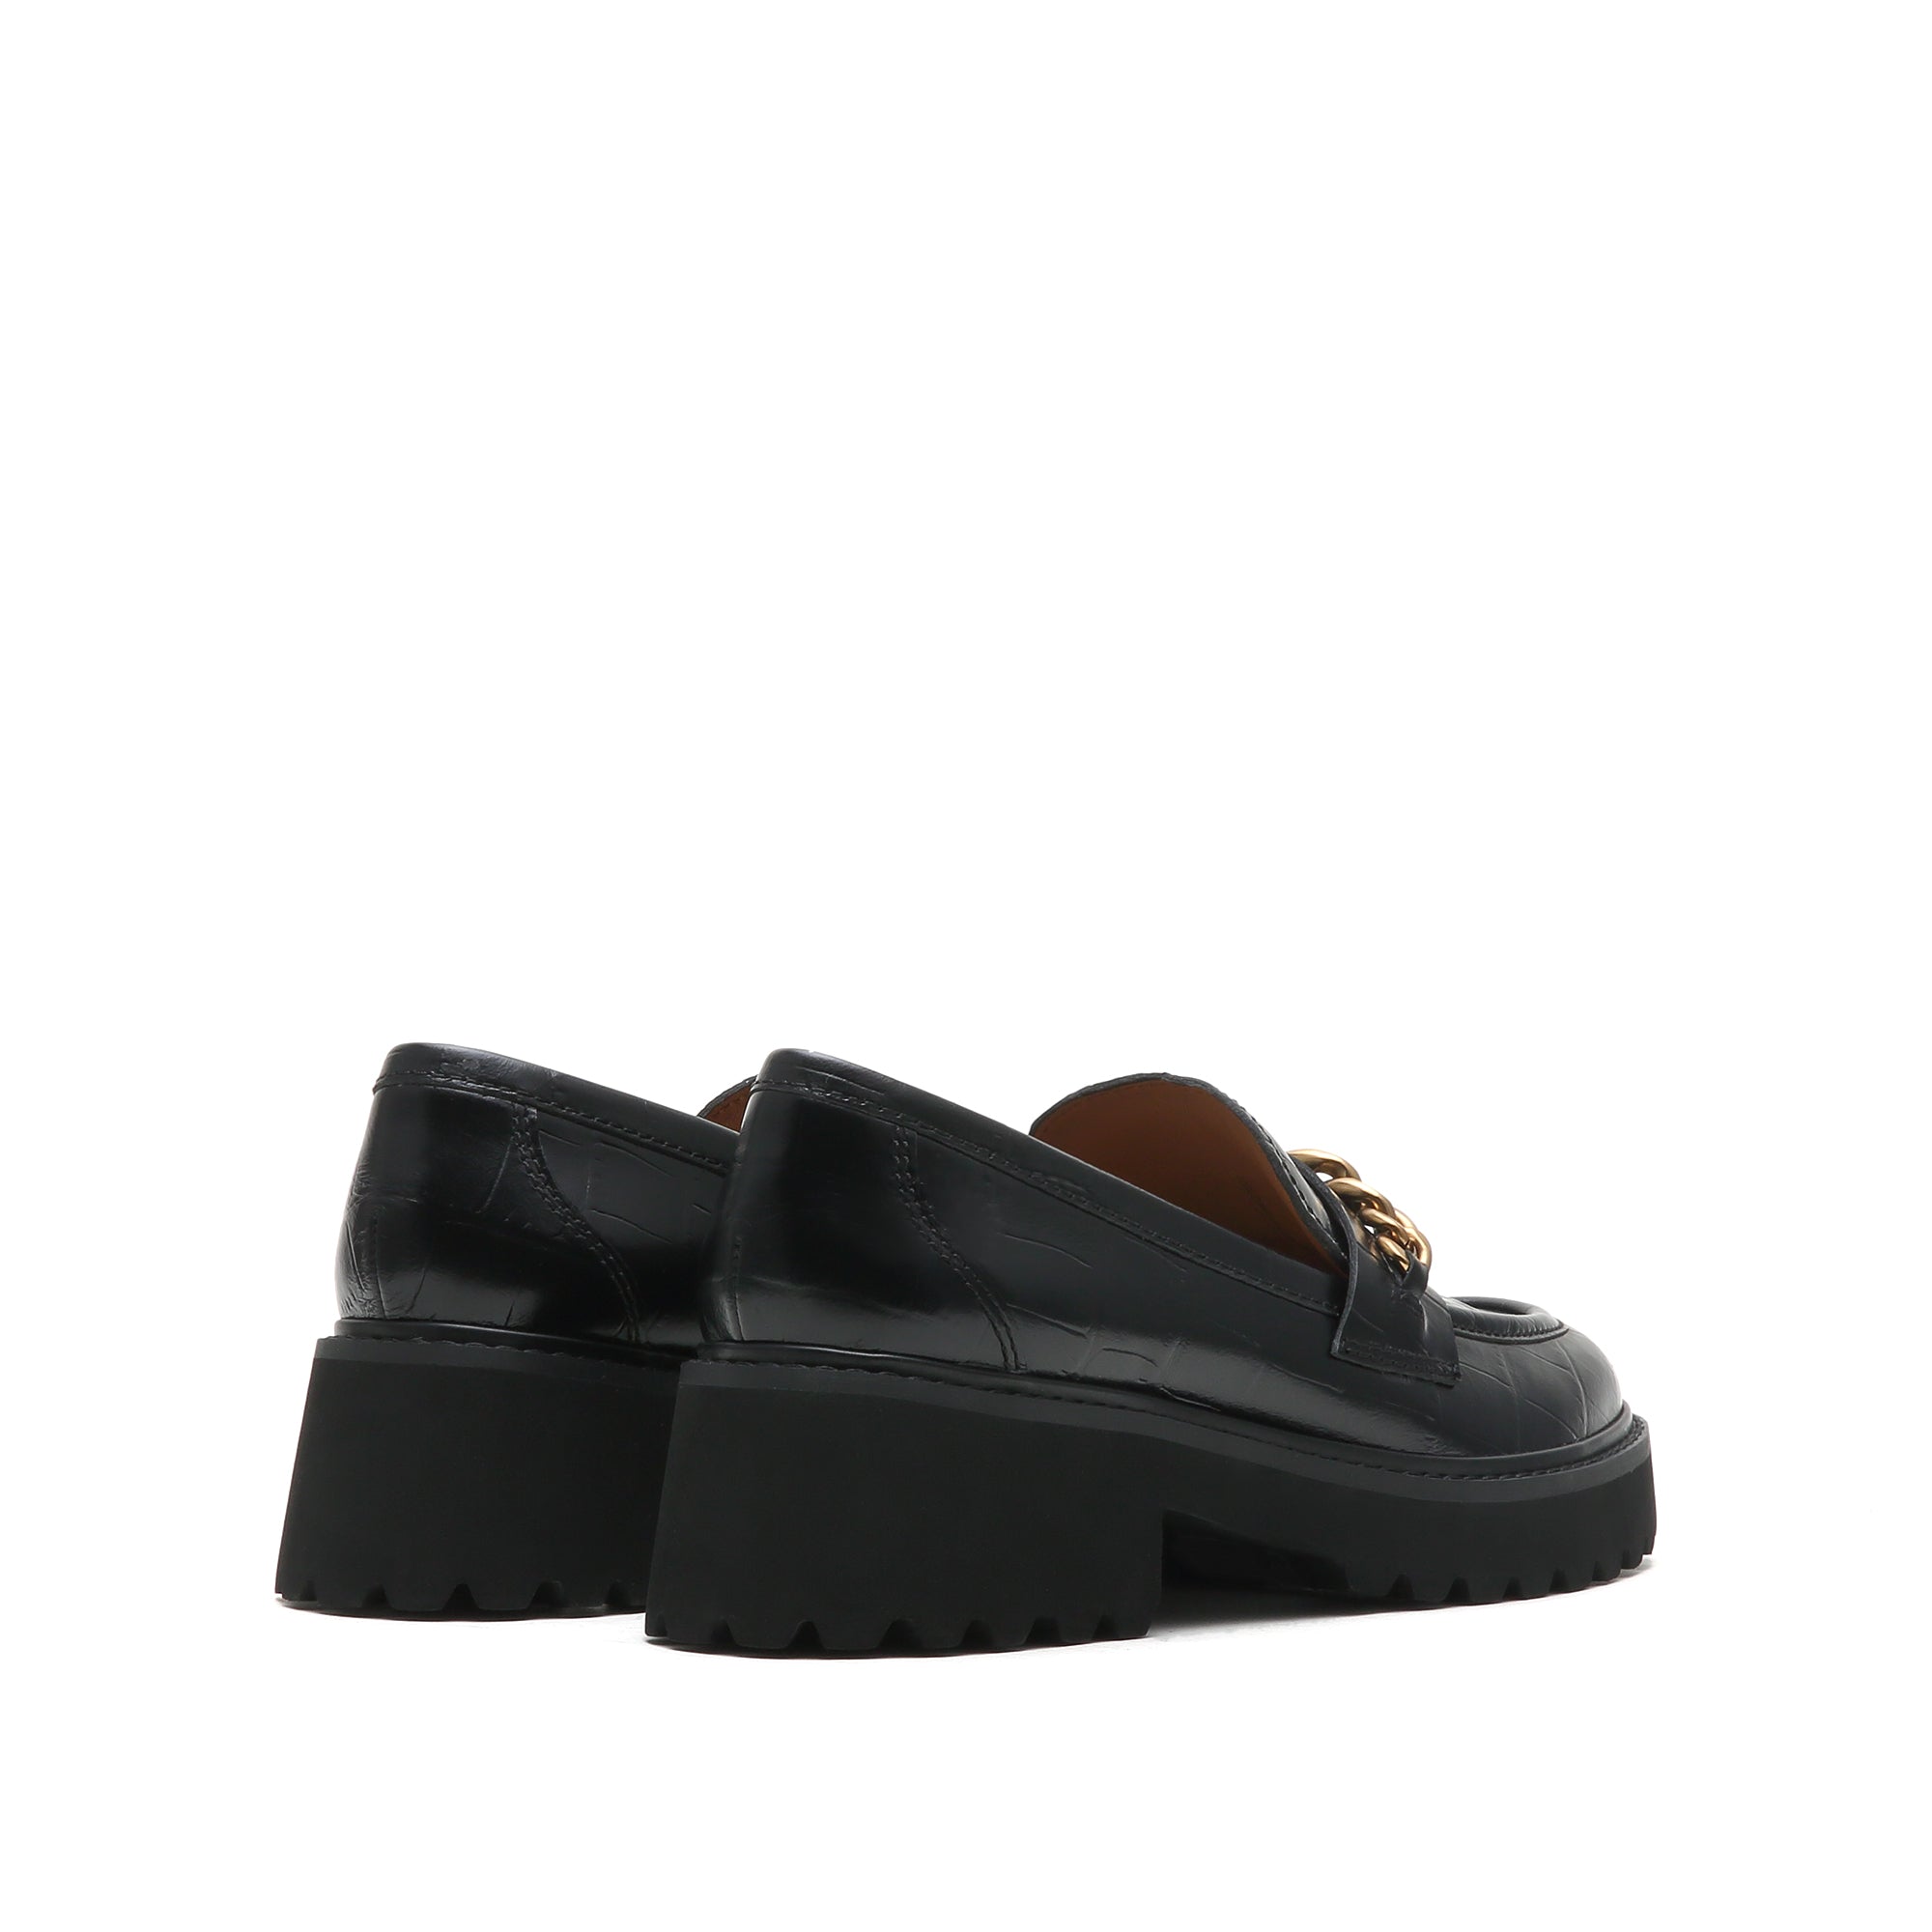 Chain Buckles Platform loafers